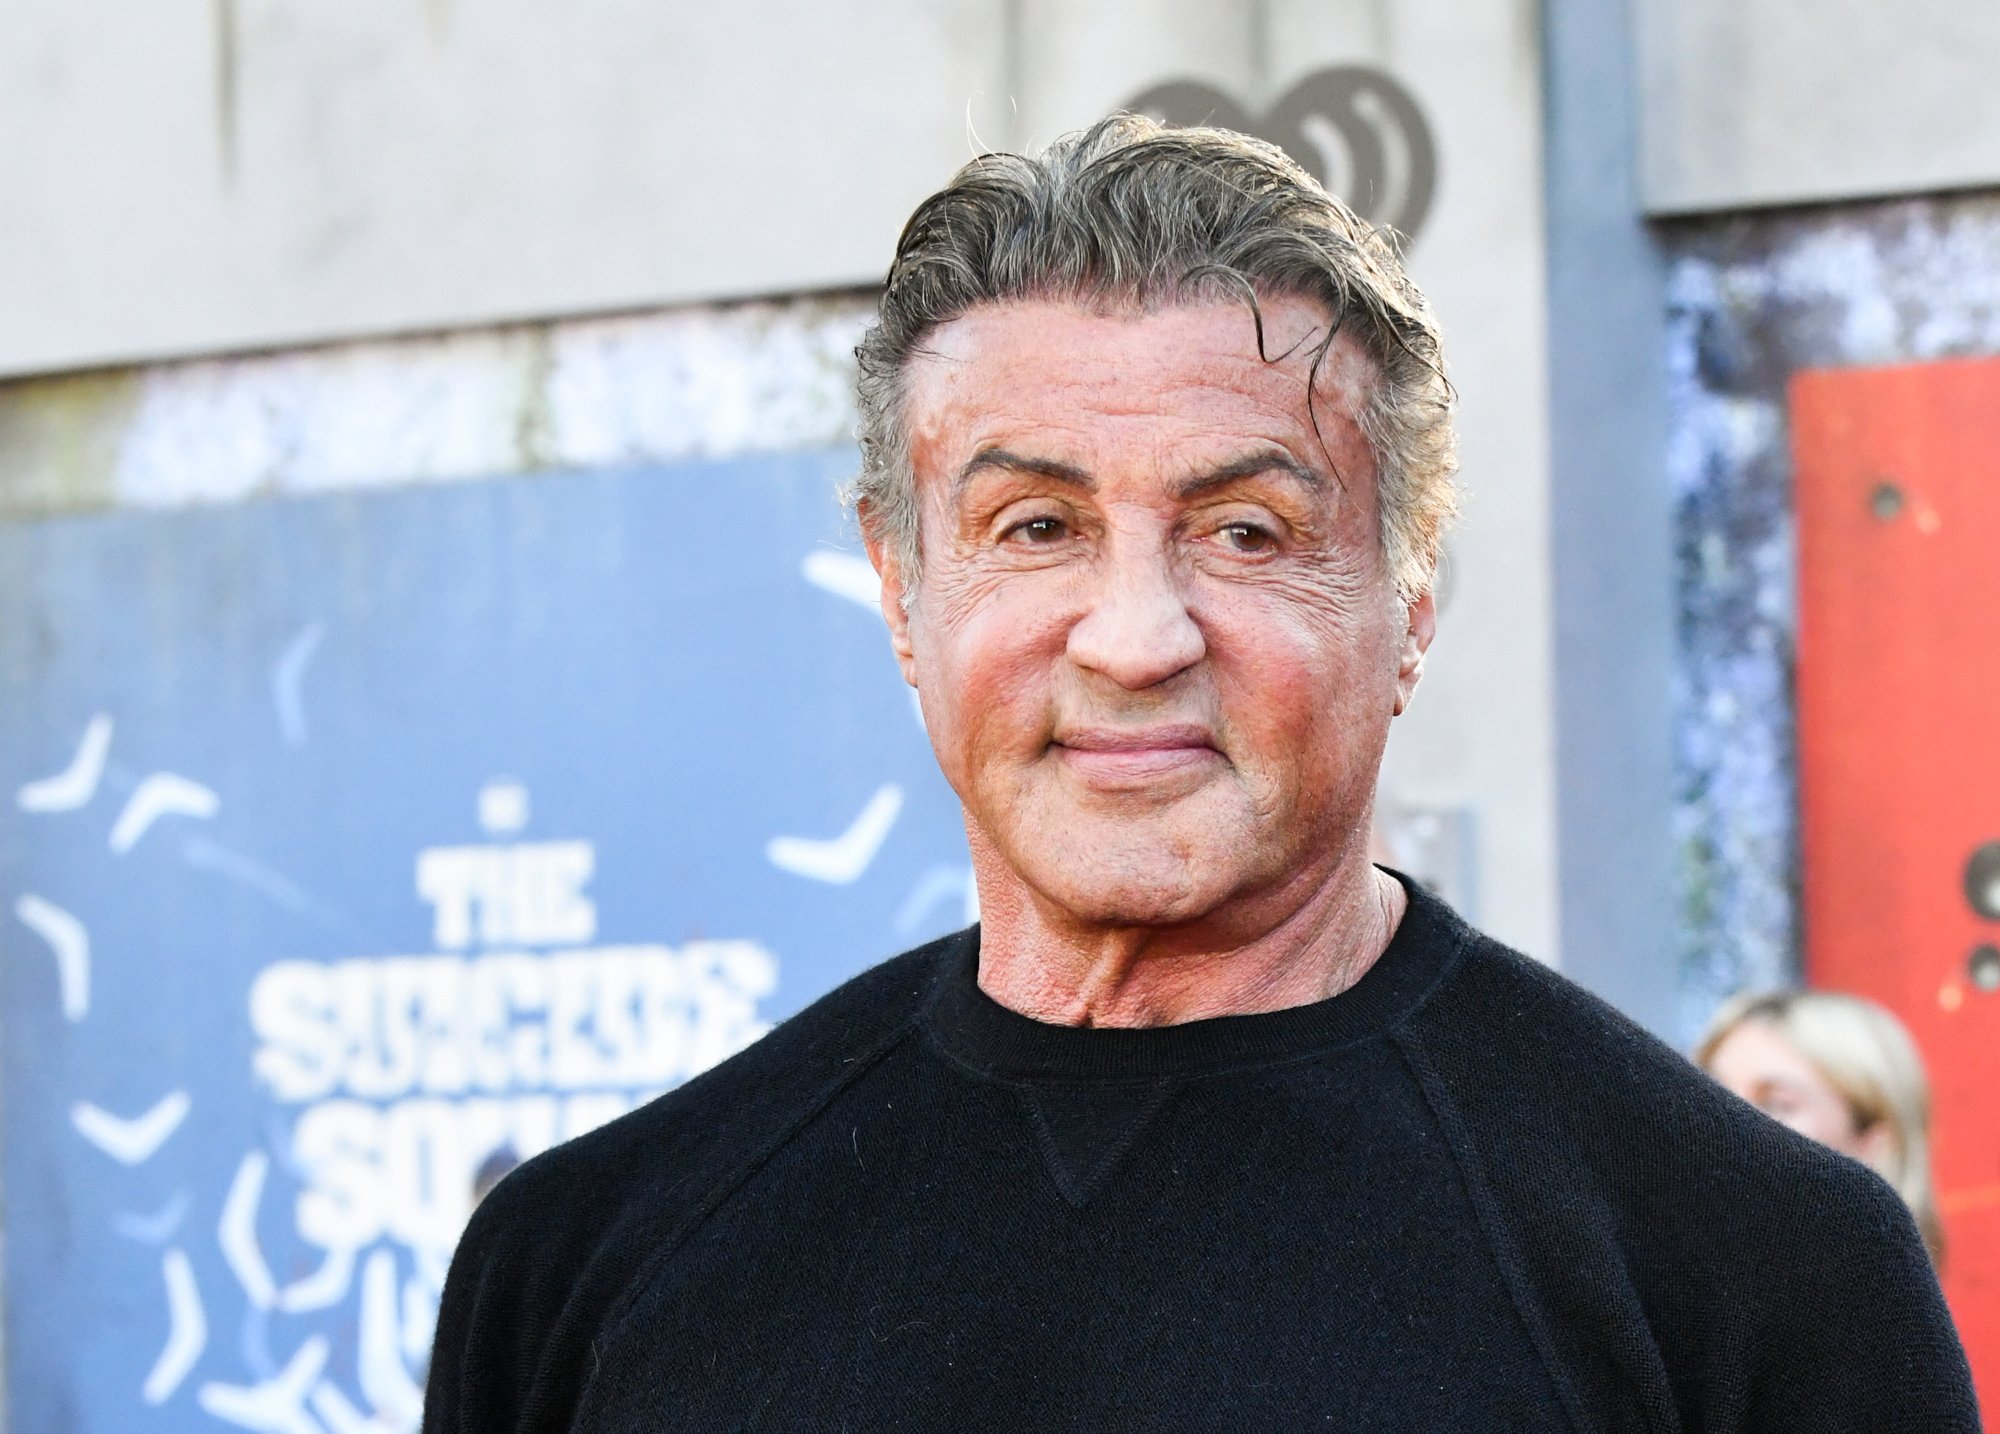 King Shark voice actor Sylvester Stallone at the premiere for 'The Suicide Squad.' He's wearing a black shirt and smiling at the camera.